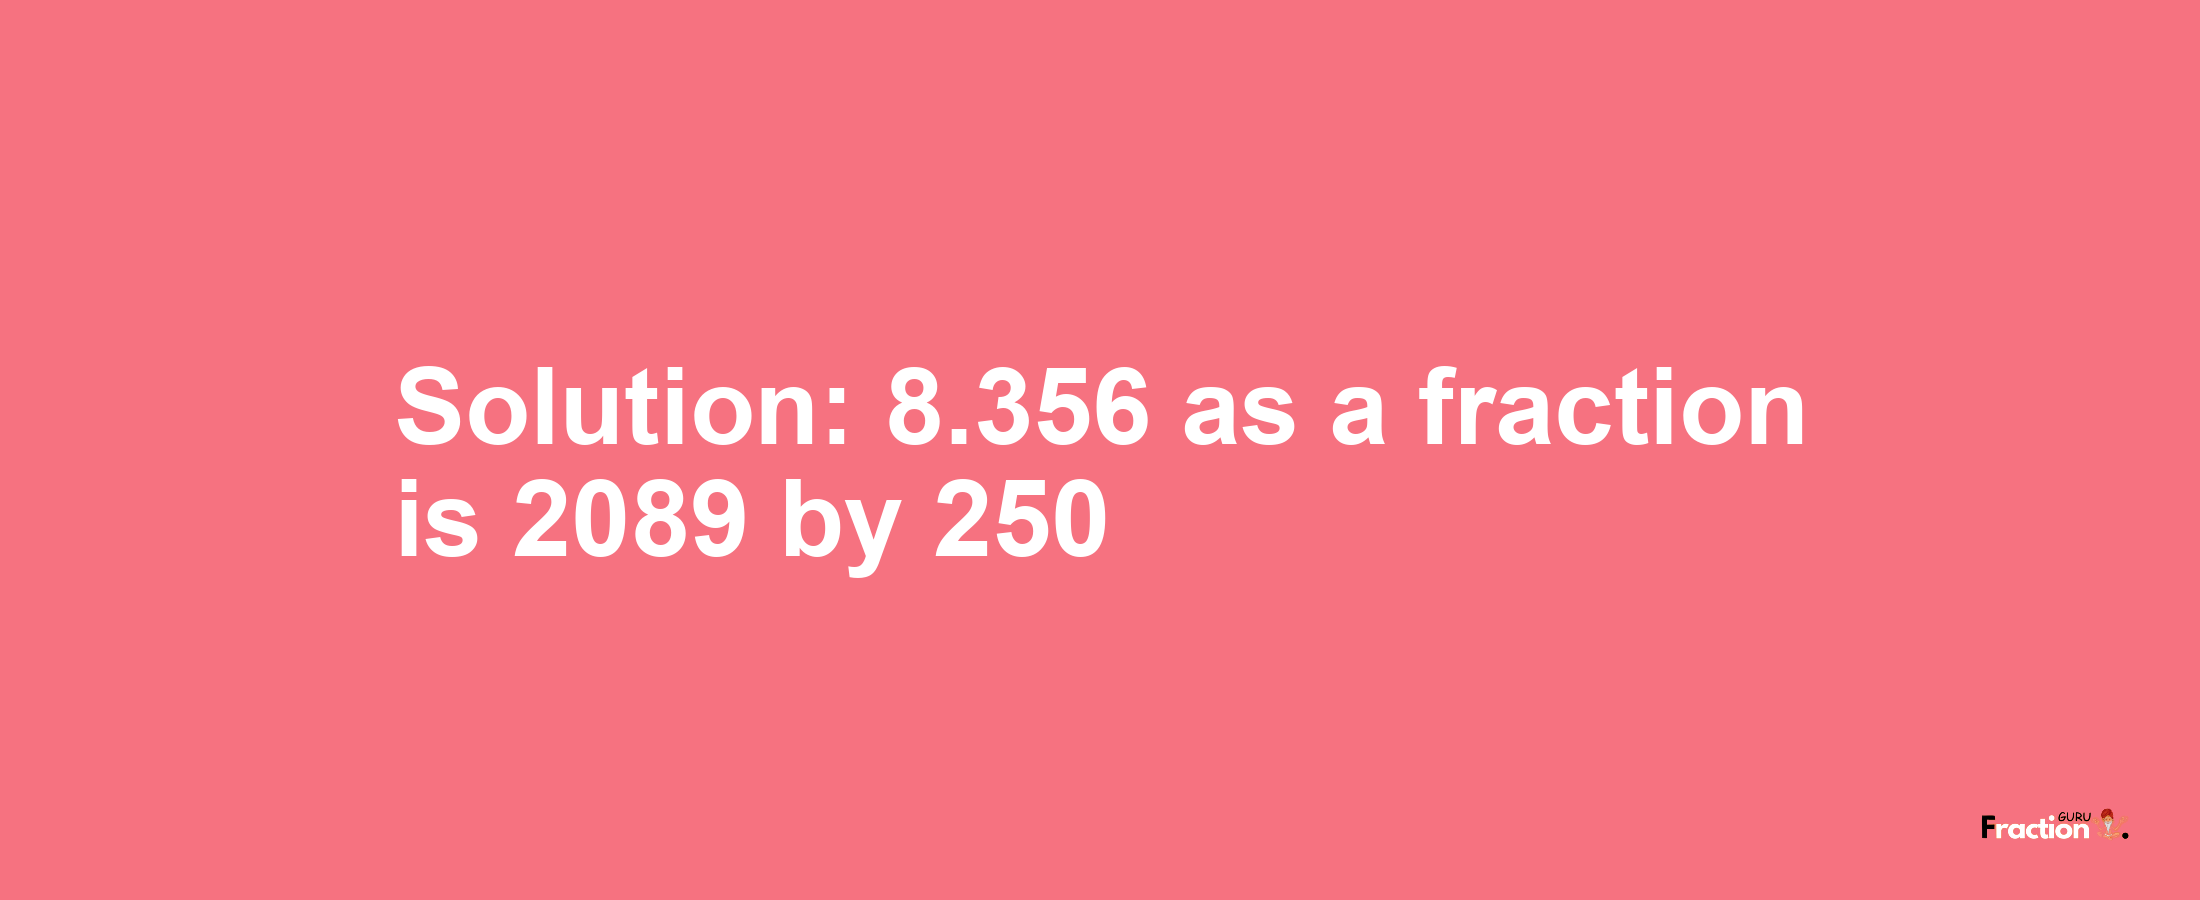 Solution:8.356 as a fraction is 2089/250